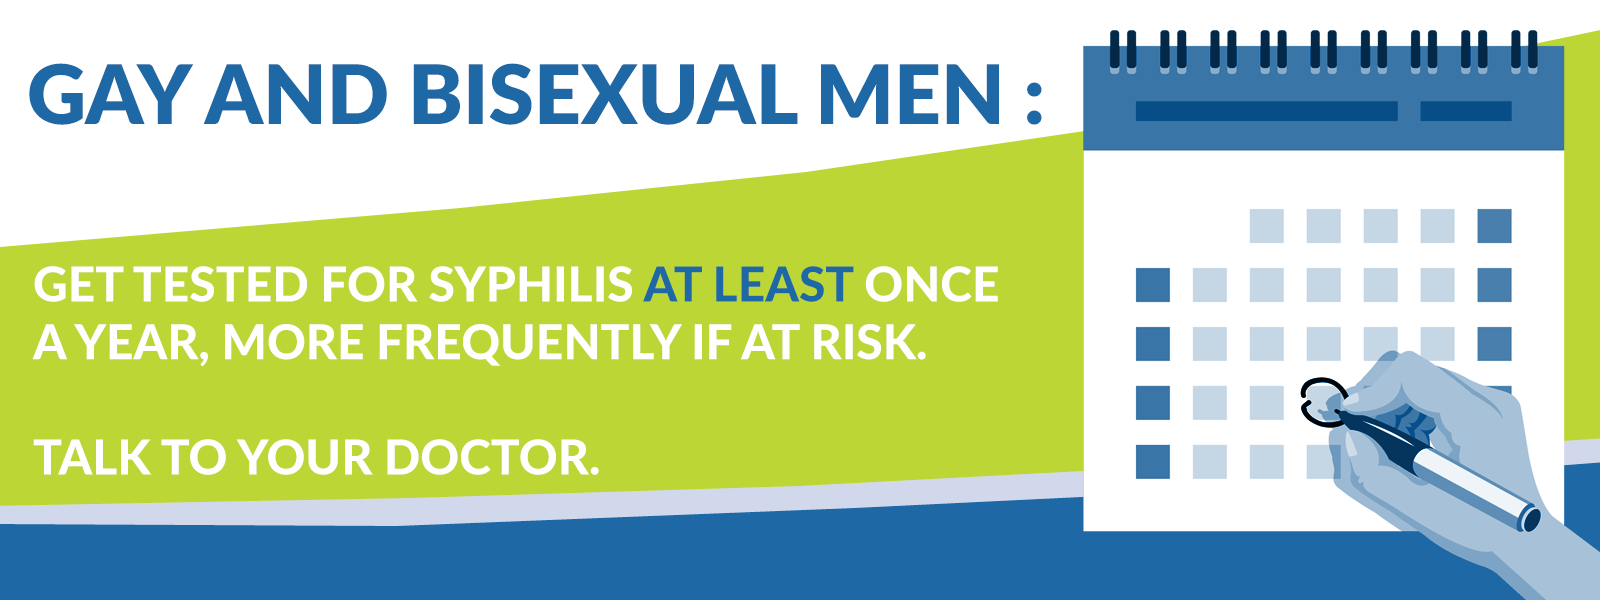 As syphilis goes up, get tested at least once a year. Talk to your doctor.